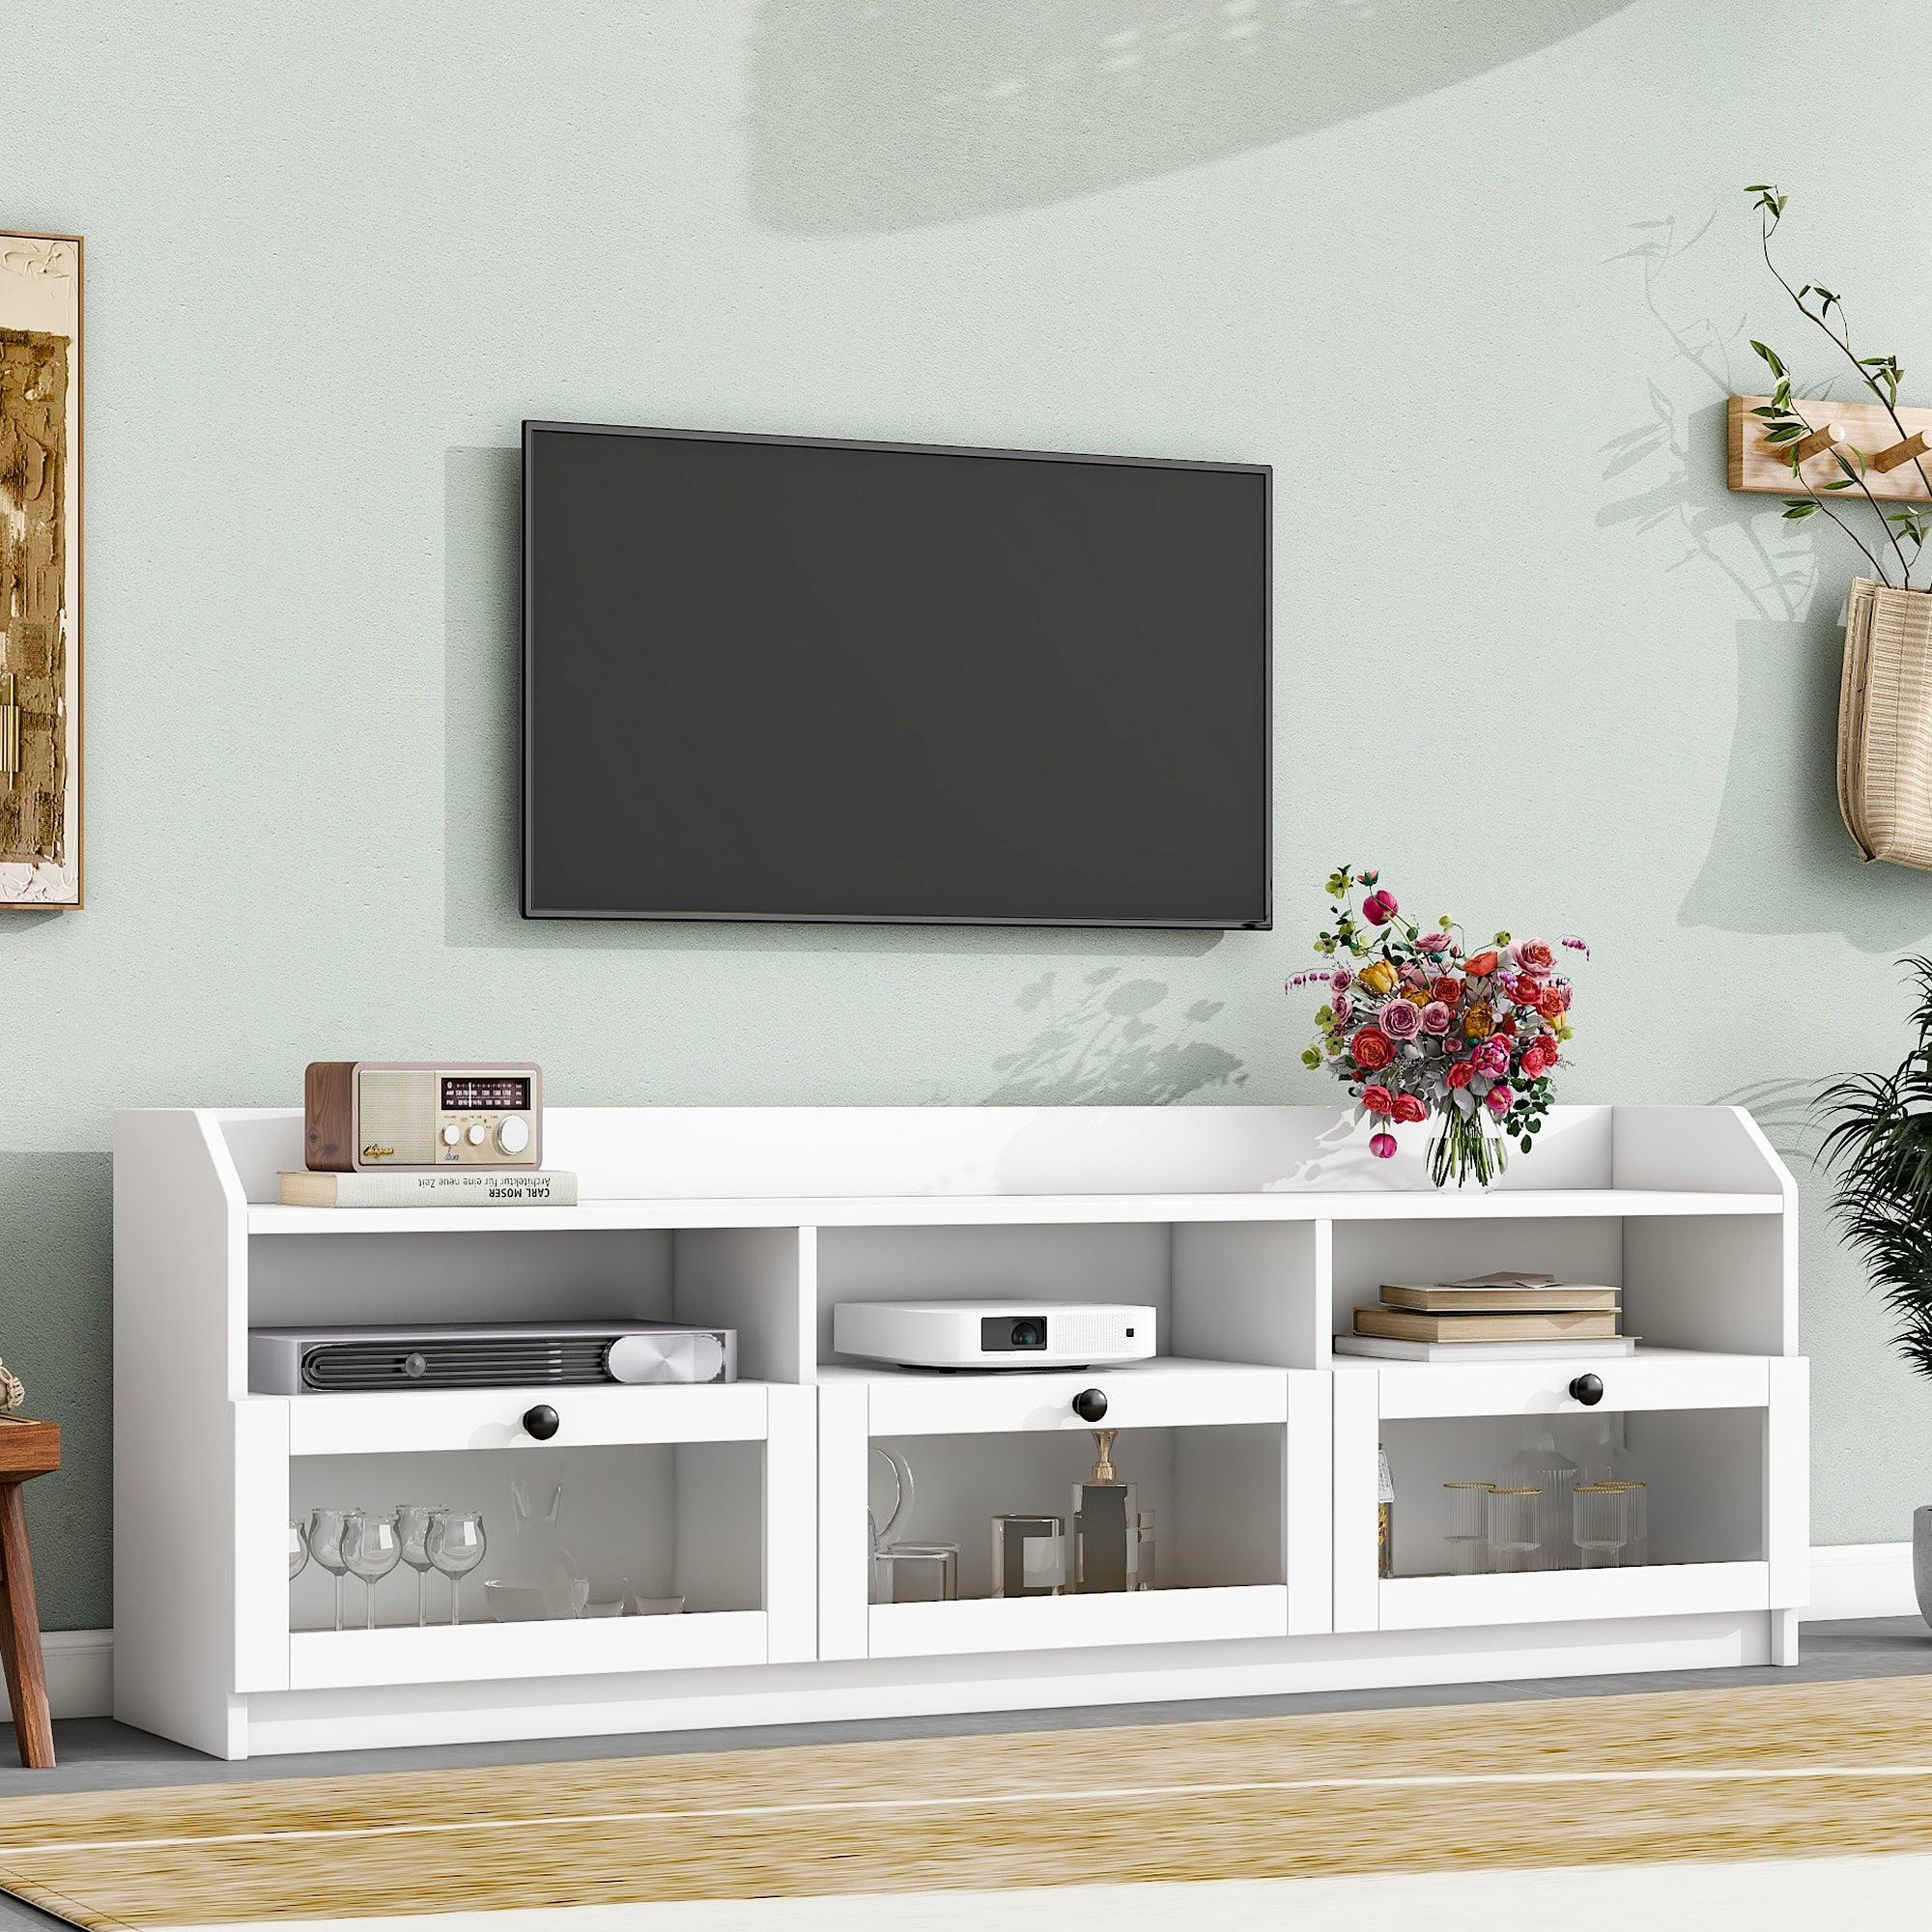 🆓🚛 Sleek & Modern Design Tv Stand With Acrylic Board Door, Chic Elegant Media Console for Tvs Up To 65", Ample Storage Space Tv Cabinet - White